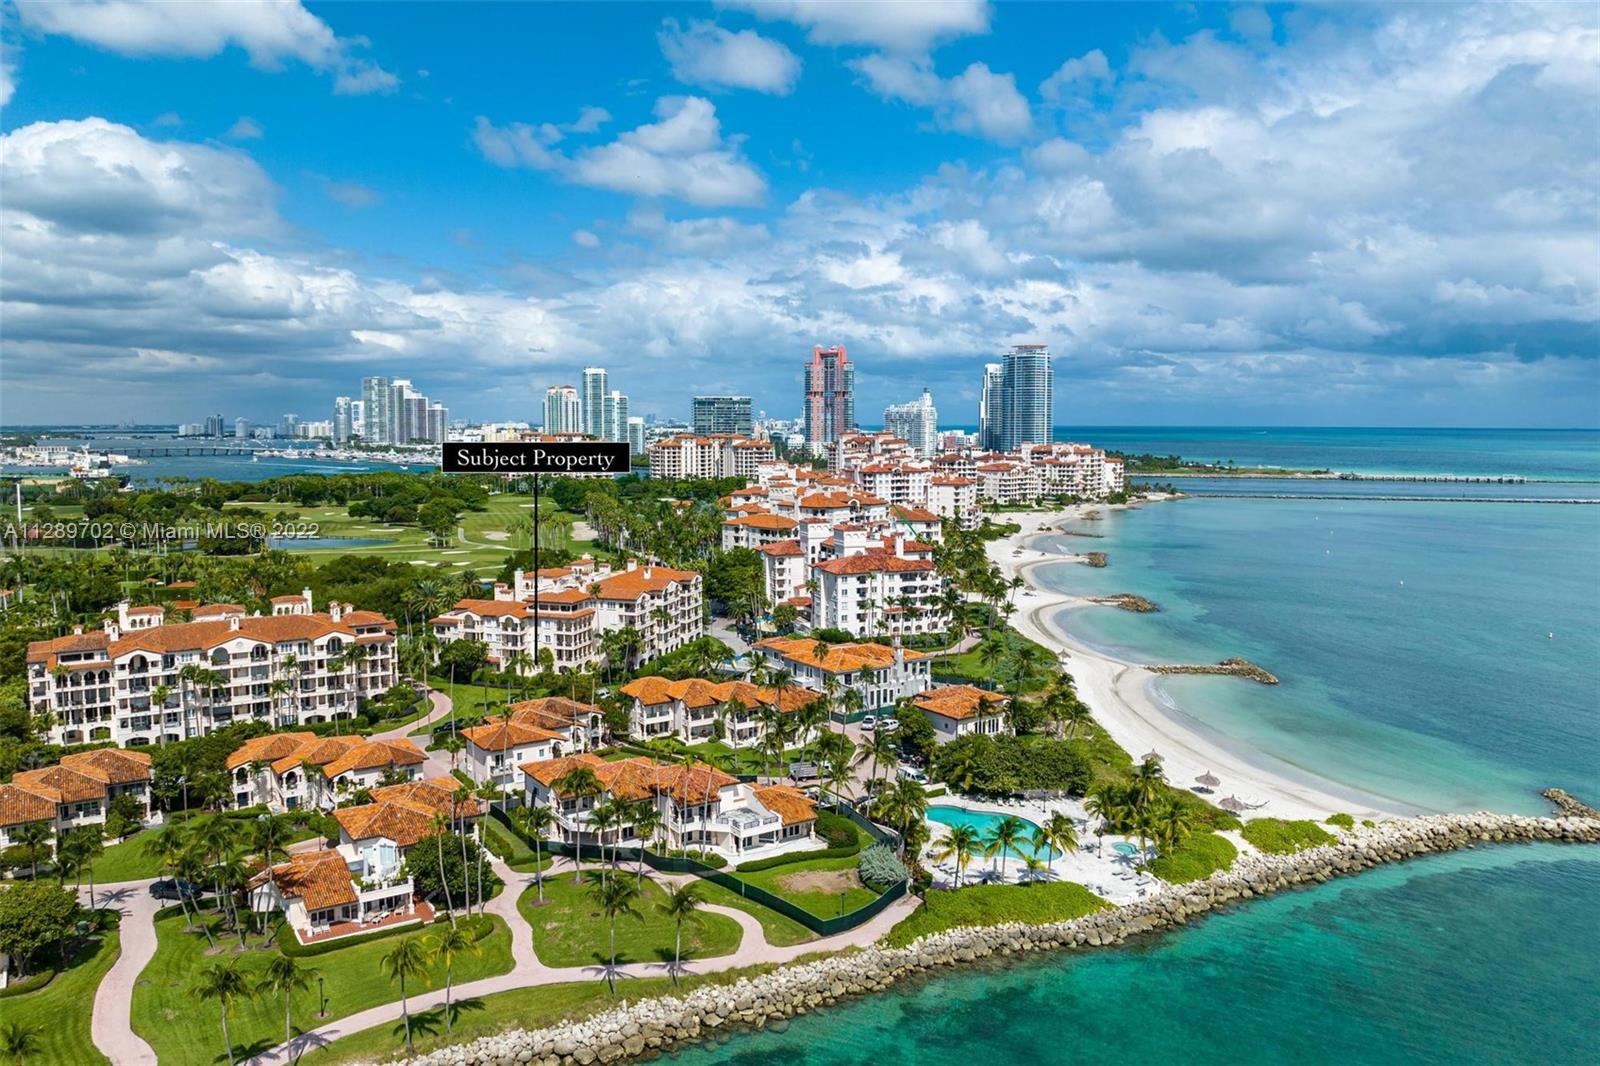 Own a piece of Miami’s exclusive private island in the nations most prestigious zip code, reachable only by ferry! Fisher Island is an exquisite lush tropical waterfront private retreat with a mile of pristine sandy beaches. This spacious unit features 3-bedrooms, 3-bathrooms, 1,425 SF terrace, modern kitchen, hurricane impact windows and doors, beautiful oversized wraparound terrace perfect for hosting and entertaining, two assigned parking spaces, golf cart parking and large storage outside of unit. With an option to join the world renowned Fisher Island country club which offers members and guests the finest amenities; 6 excellent restaurants, 9-hole golf course, pools, spa, gym, 2 marinas, 19 tennis courts, helipad and so much more. Endless opportunity for short-term rental income.